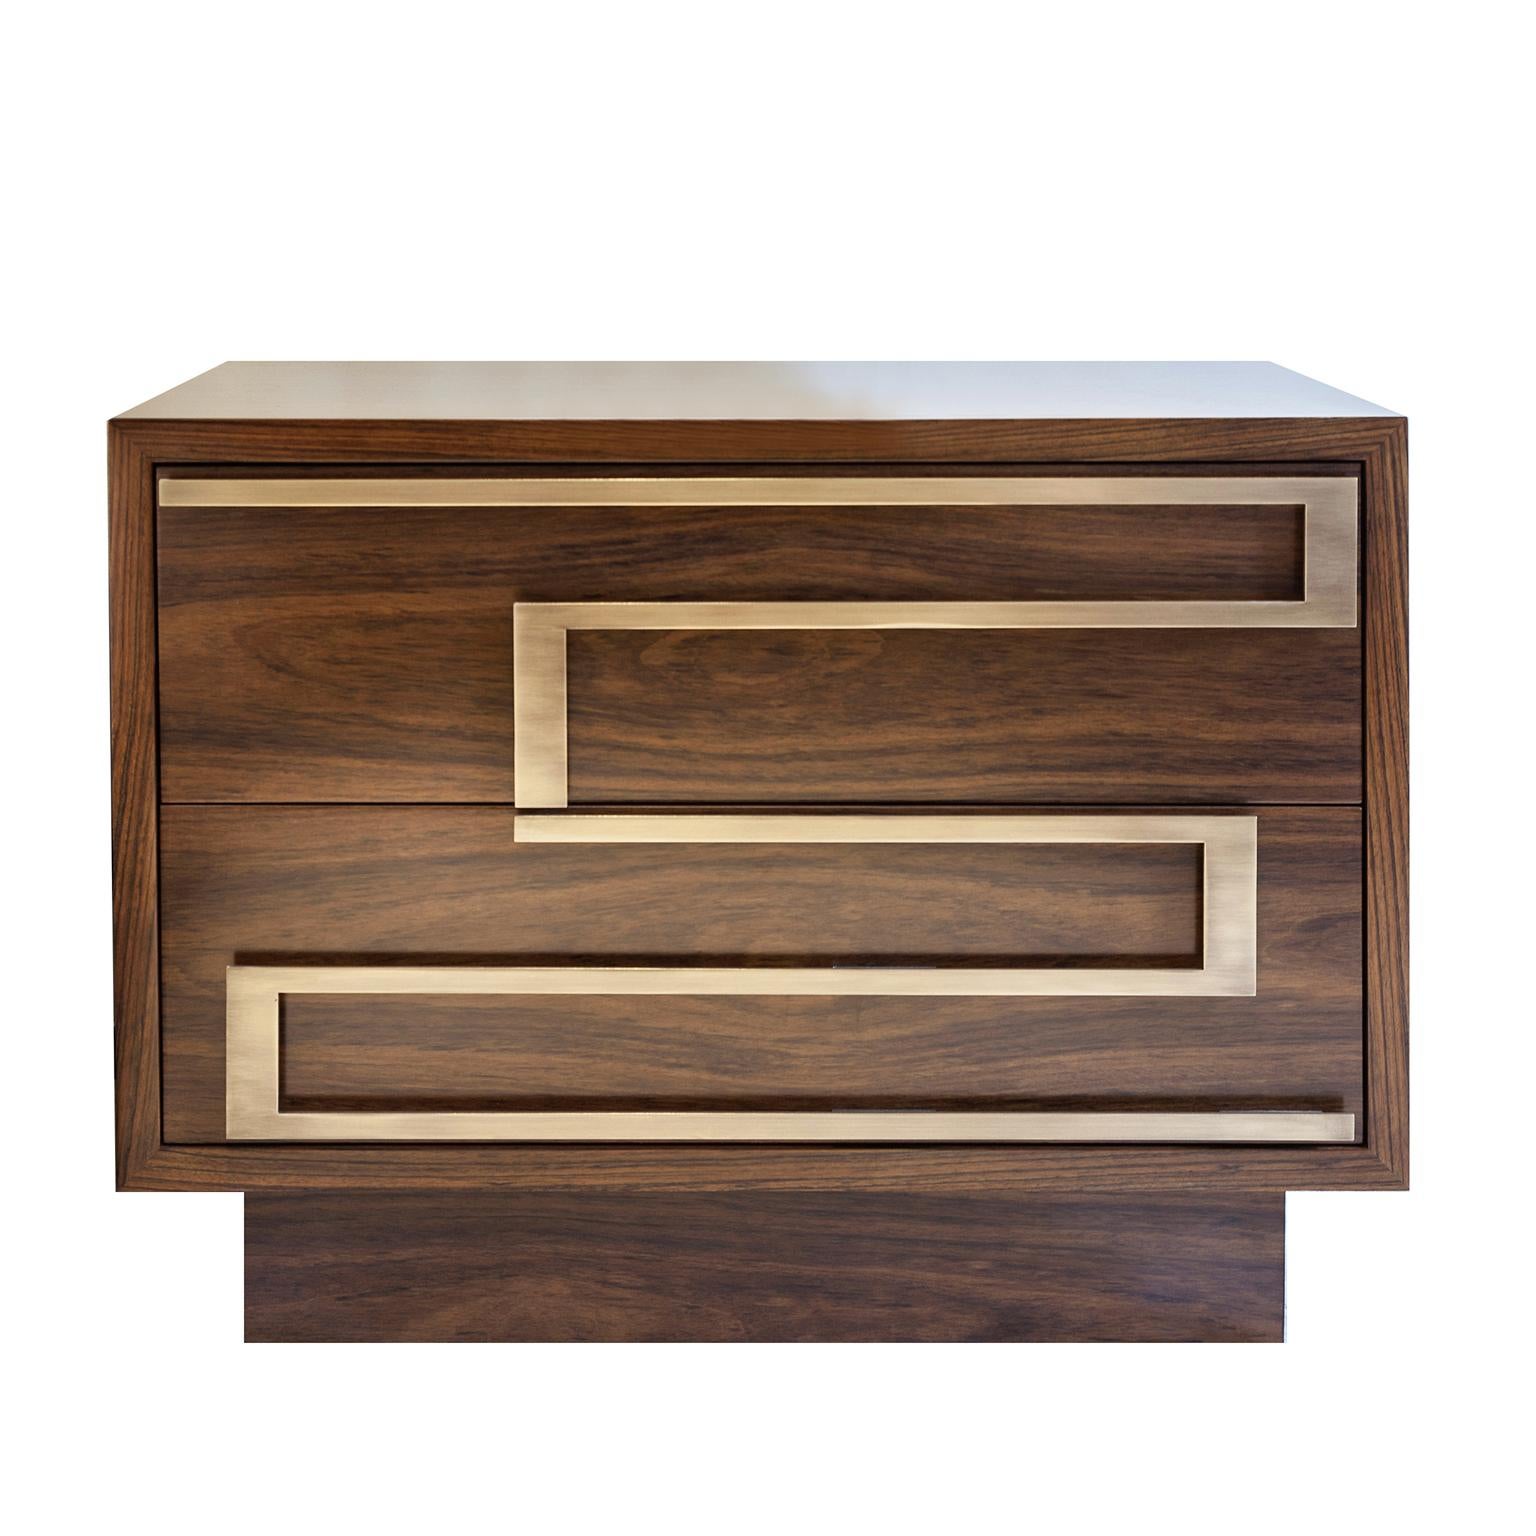 Italian Ascens Nightstand with Two Drawers in Brazilian Walnut and Brass Handles For Sale